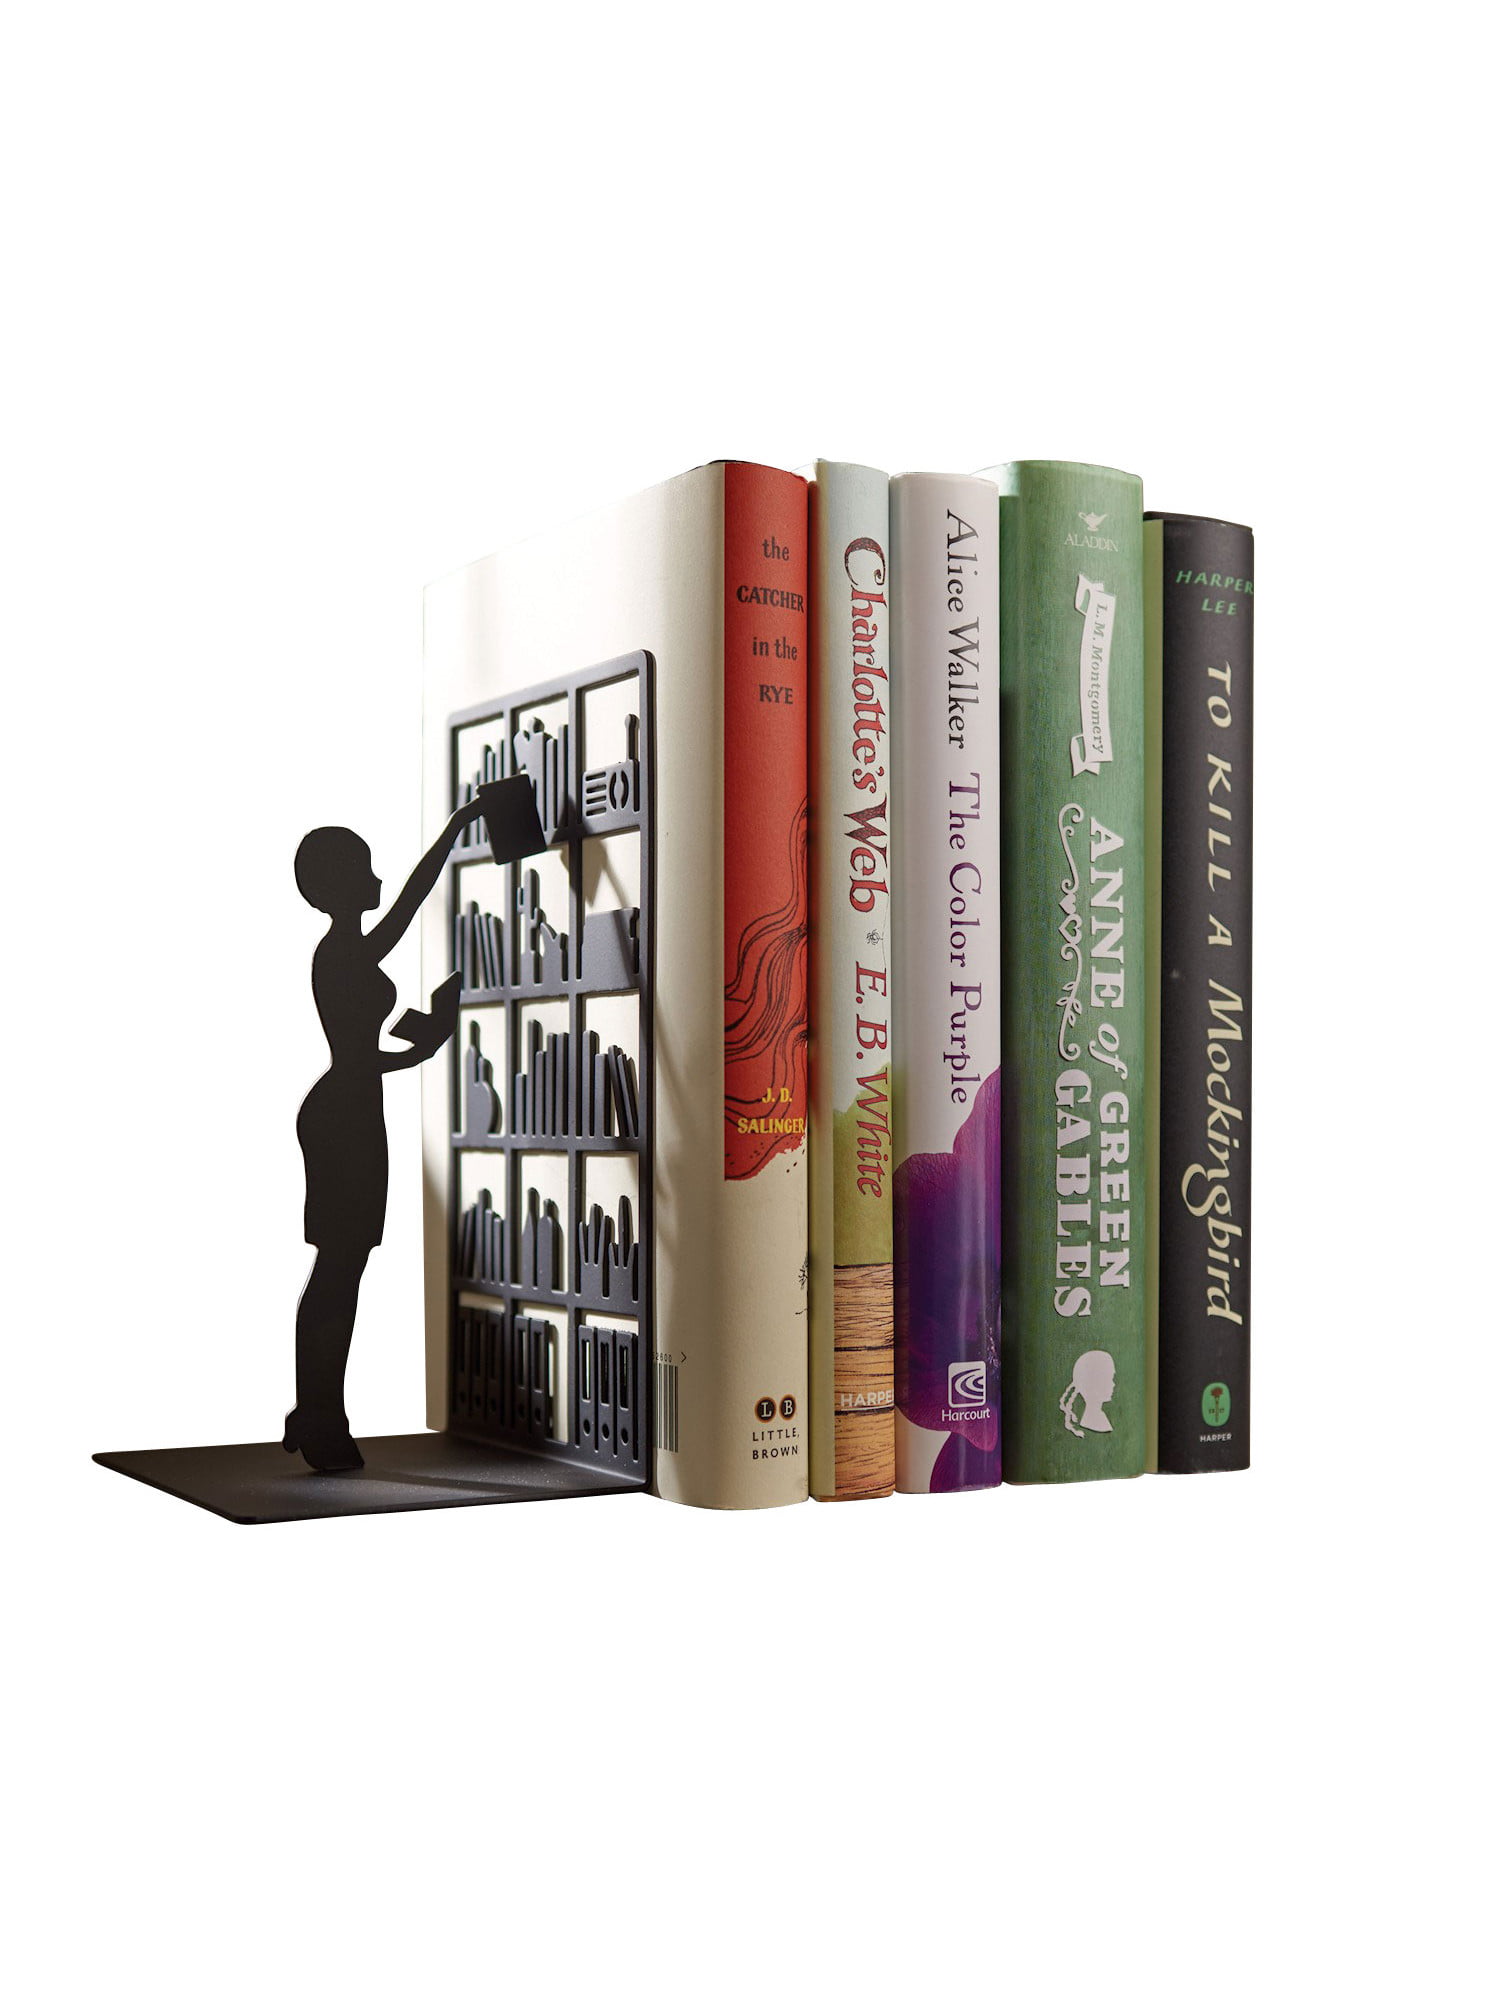 Bookend Form L Metal Bookends Bookshelf Support-School Office Books Hot 